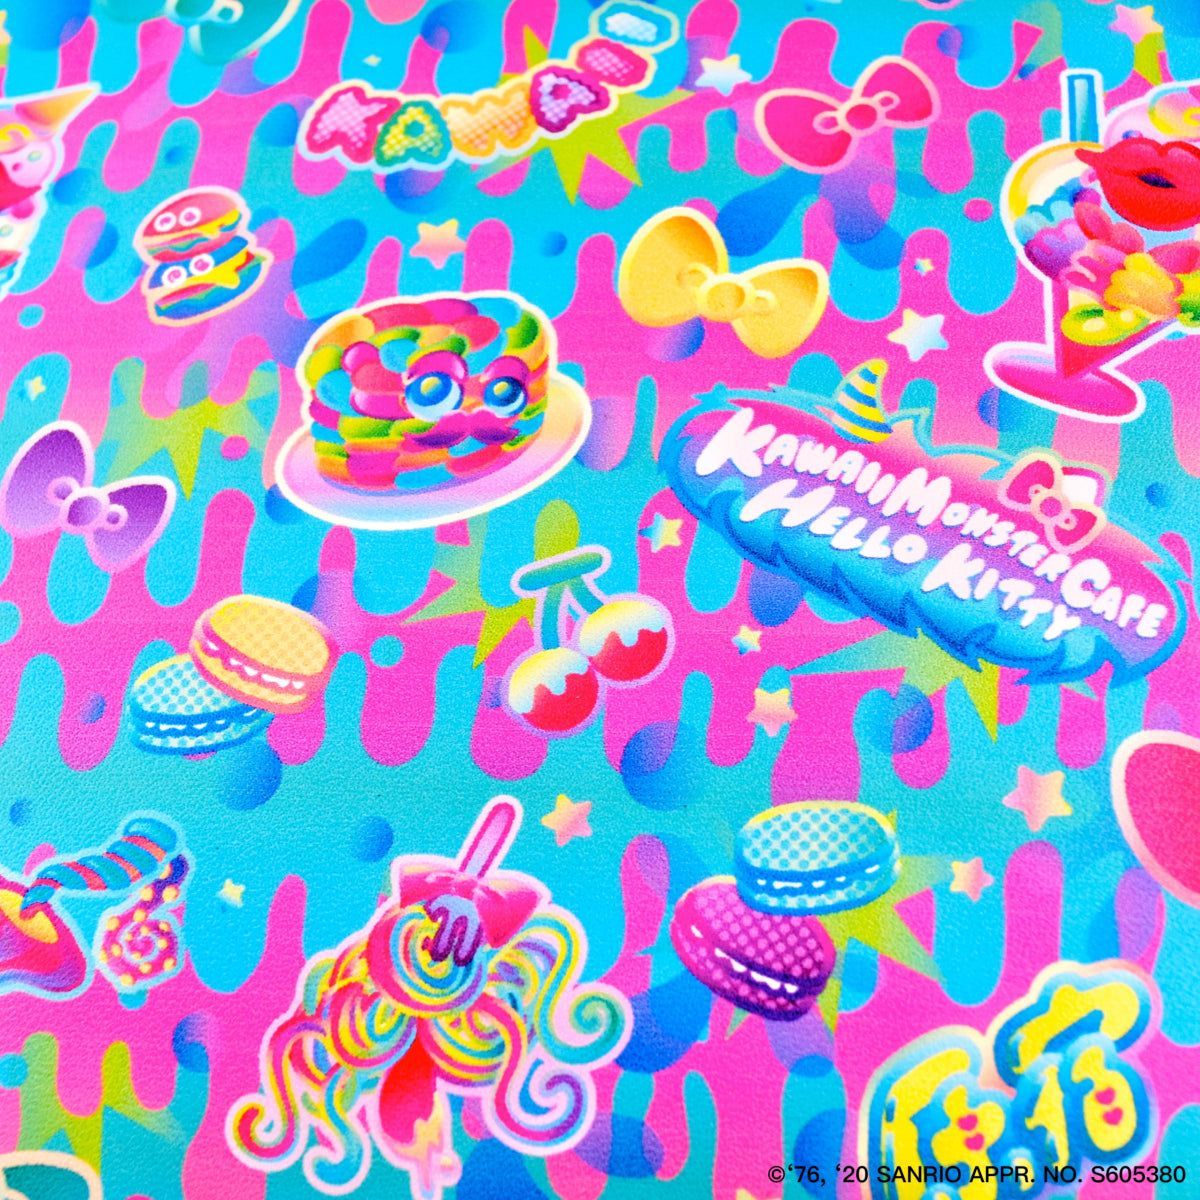 A close up of the fabric with Hello Kitty, Munchkins, and other Sanrio characters on it. - Kidcore